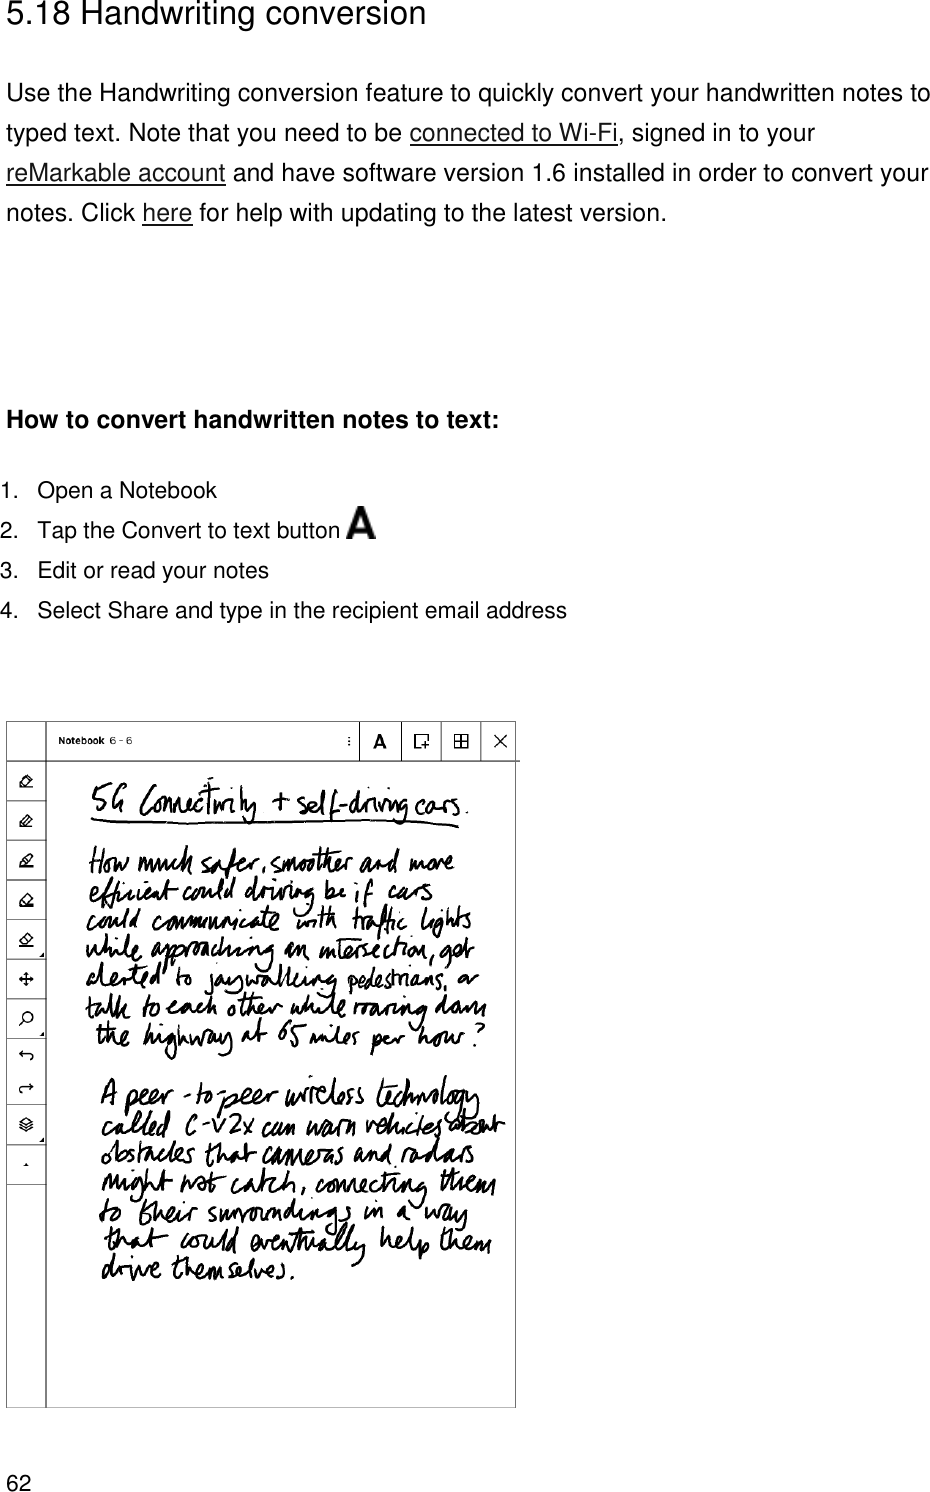 62  5.18 Handwriting conversion  Use the Handwriting conversion feature to quickly convert your handwritten notes to typed text. Note that you need to be connected to Wi-Fi, signed in to your reMarkable account and have software version 1.6 installed in order to convert your notes. Click here for help with updating to the latest version.     How to convert handwritten notes to text: 1.  Open a Notebook 2.  Tap the Convert to text button   3.  Edit or read your notes 4.  Select Share and type in the recipient email address      